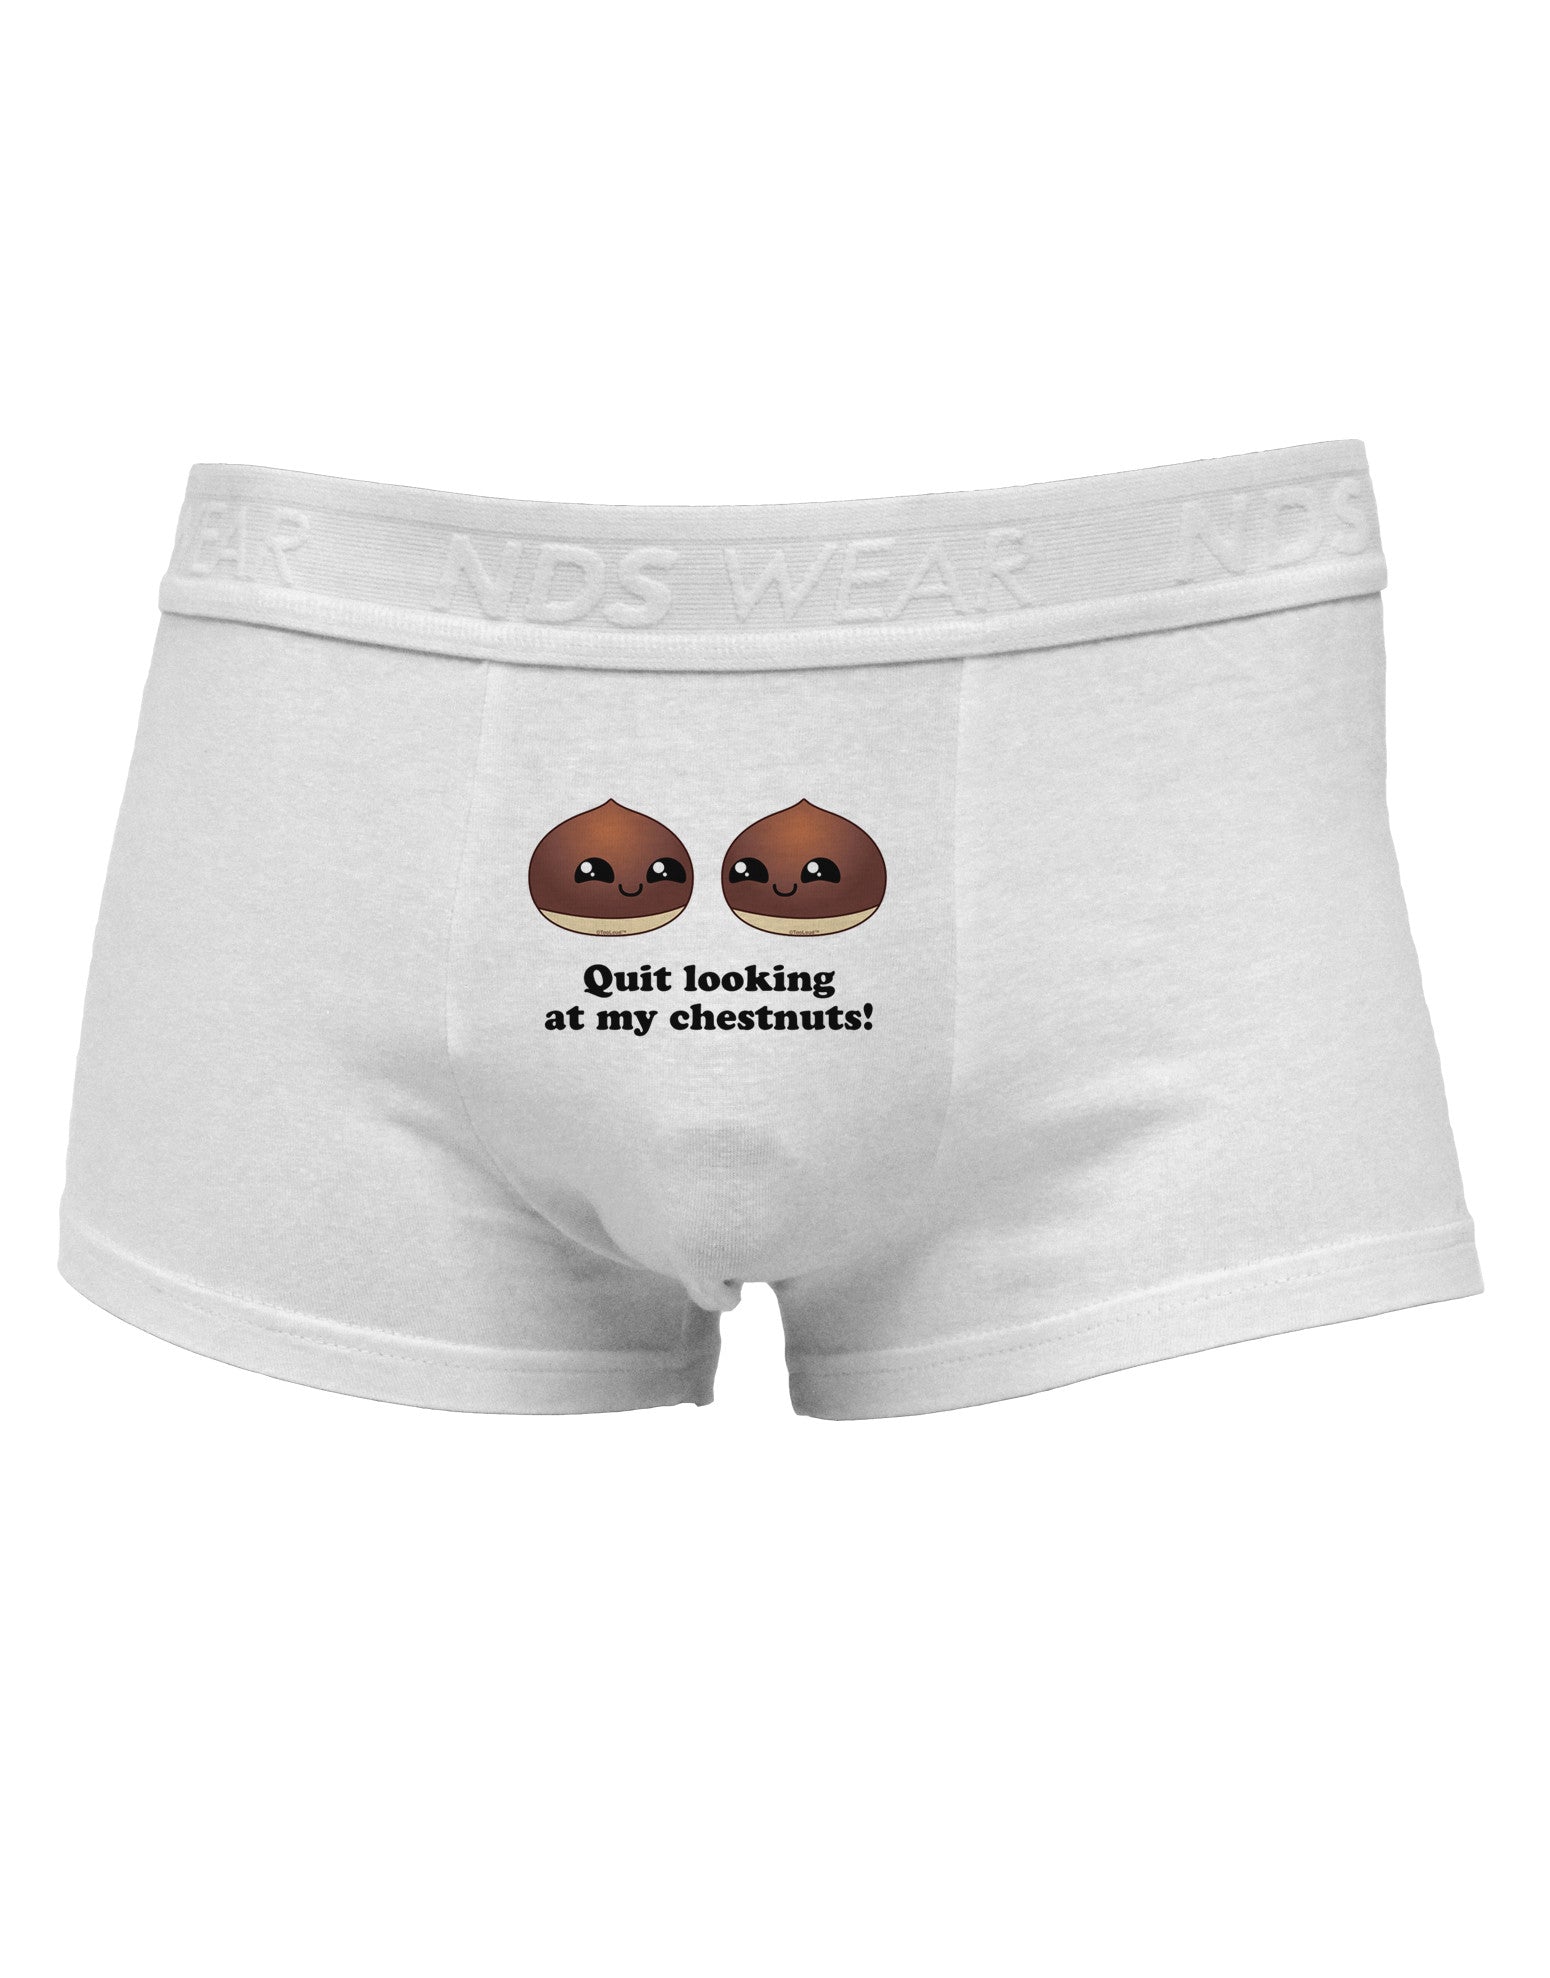 Quit Looking At My Chestnuts - Funny Mens Cotton Trunk Underwear